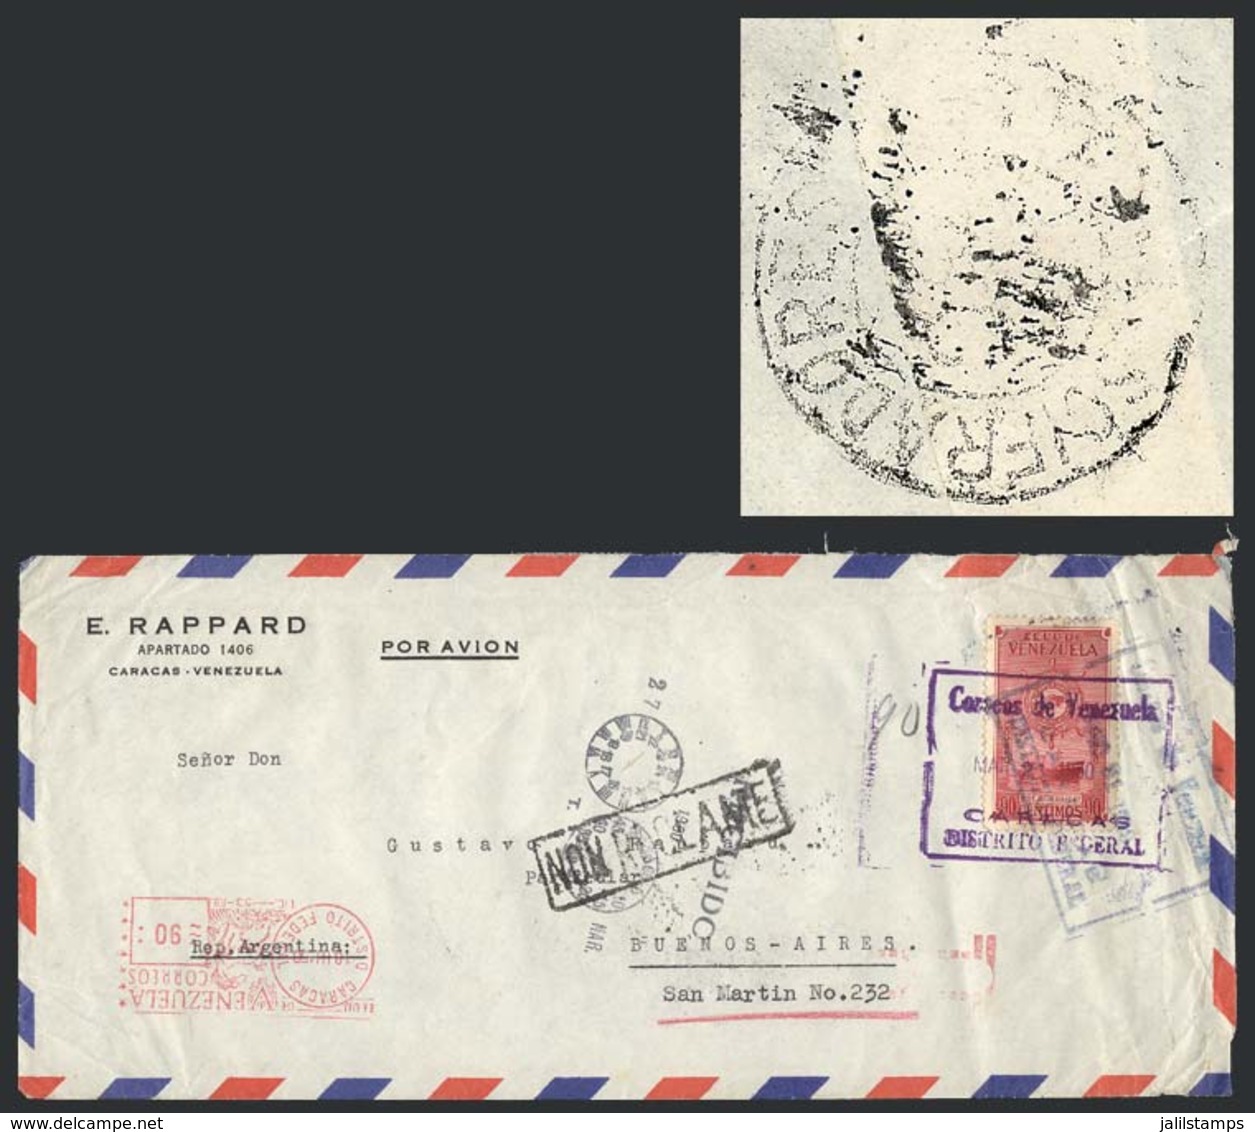 VENEZUELA: Airmail Cover Franked With 90c. And Posted To Argentina On 31/OC/1949 With Incomplete Address: Gustavo Rappar - Venezuela